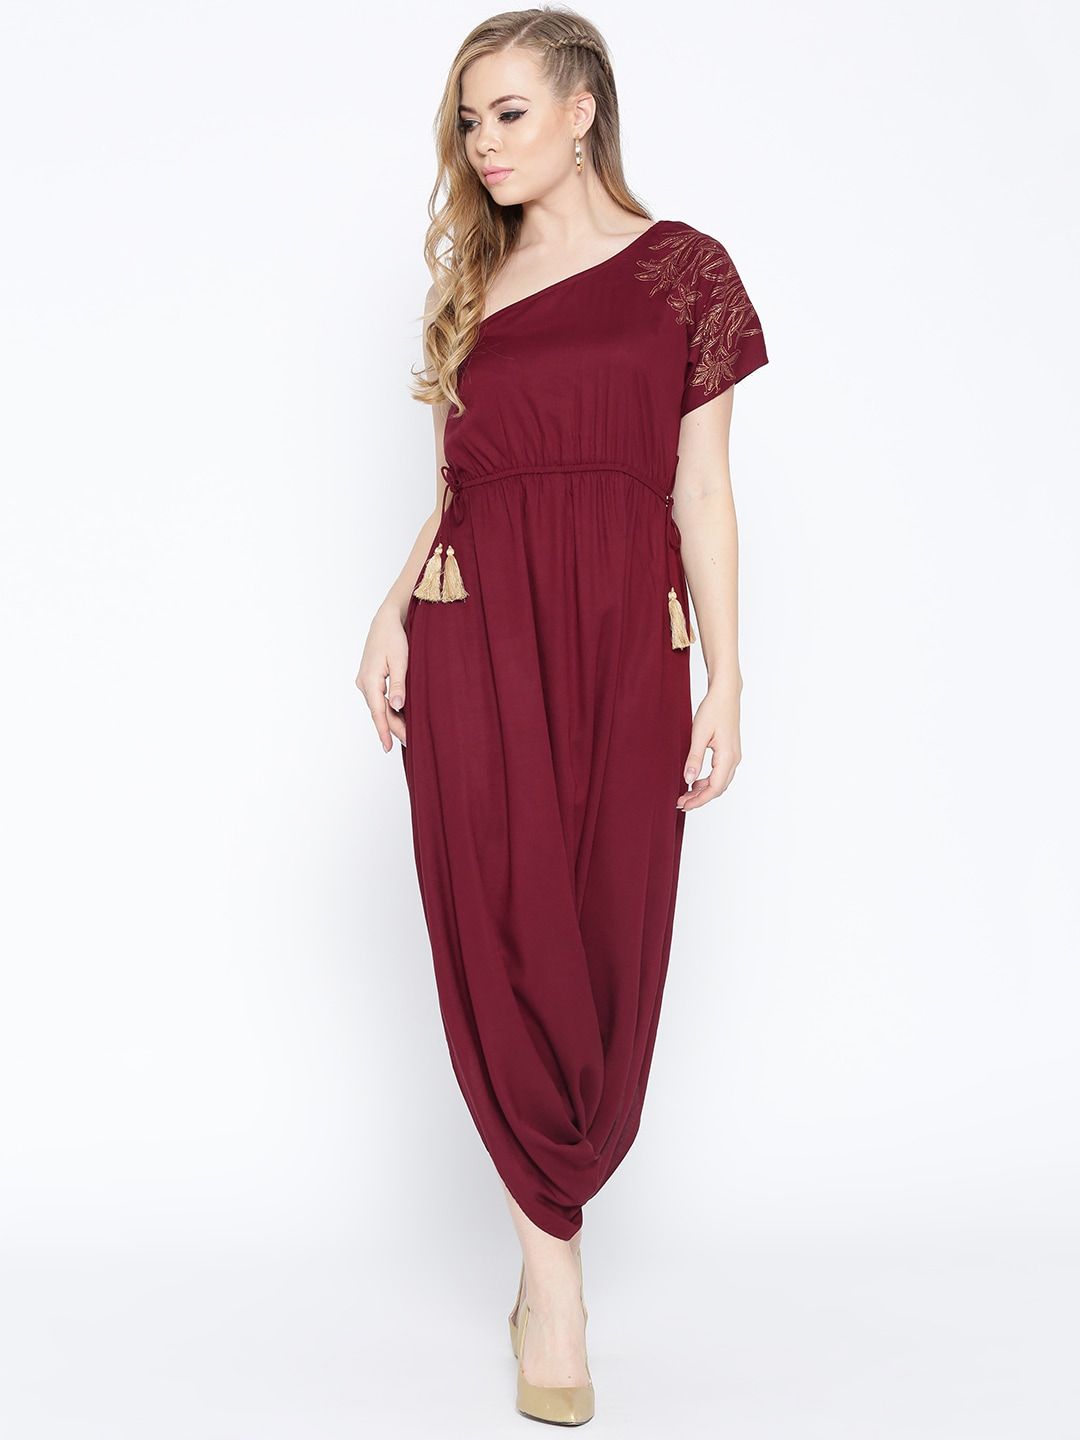 MABISH by Sonal Jain Maroon Solid One-Shoulder Dhoti Style Jumpsuit Price in India